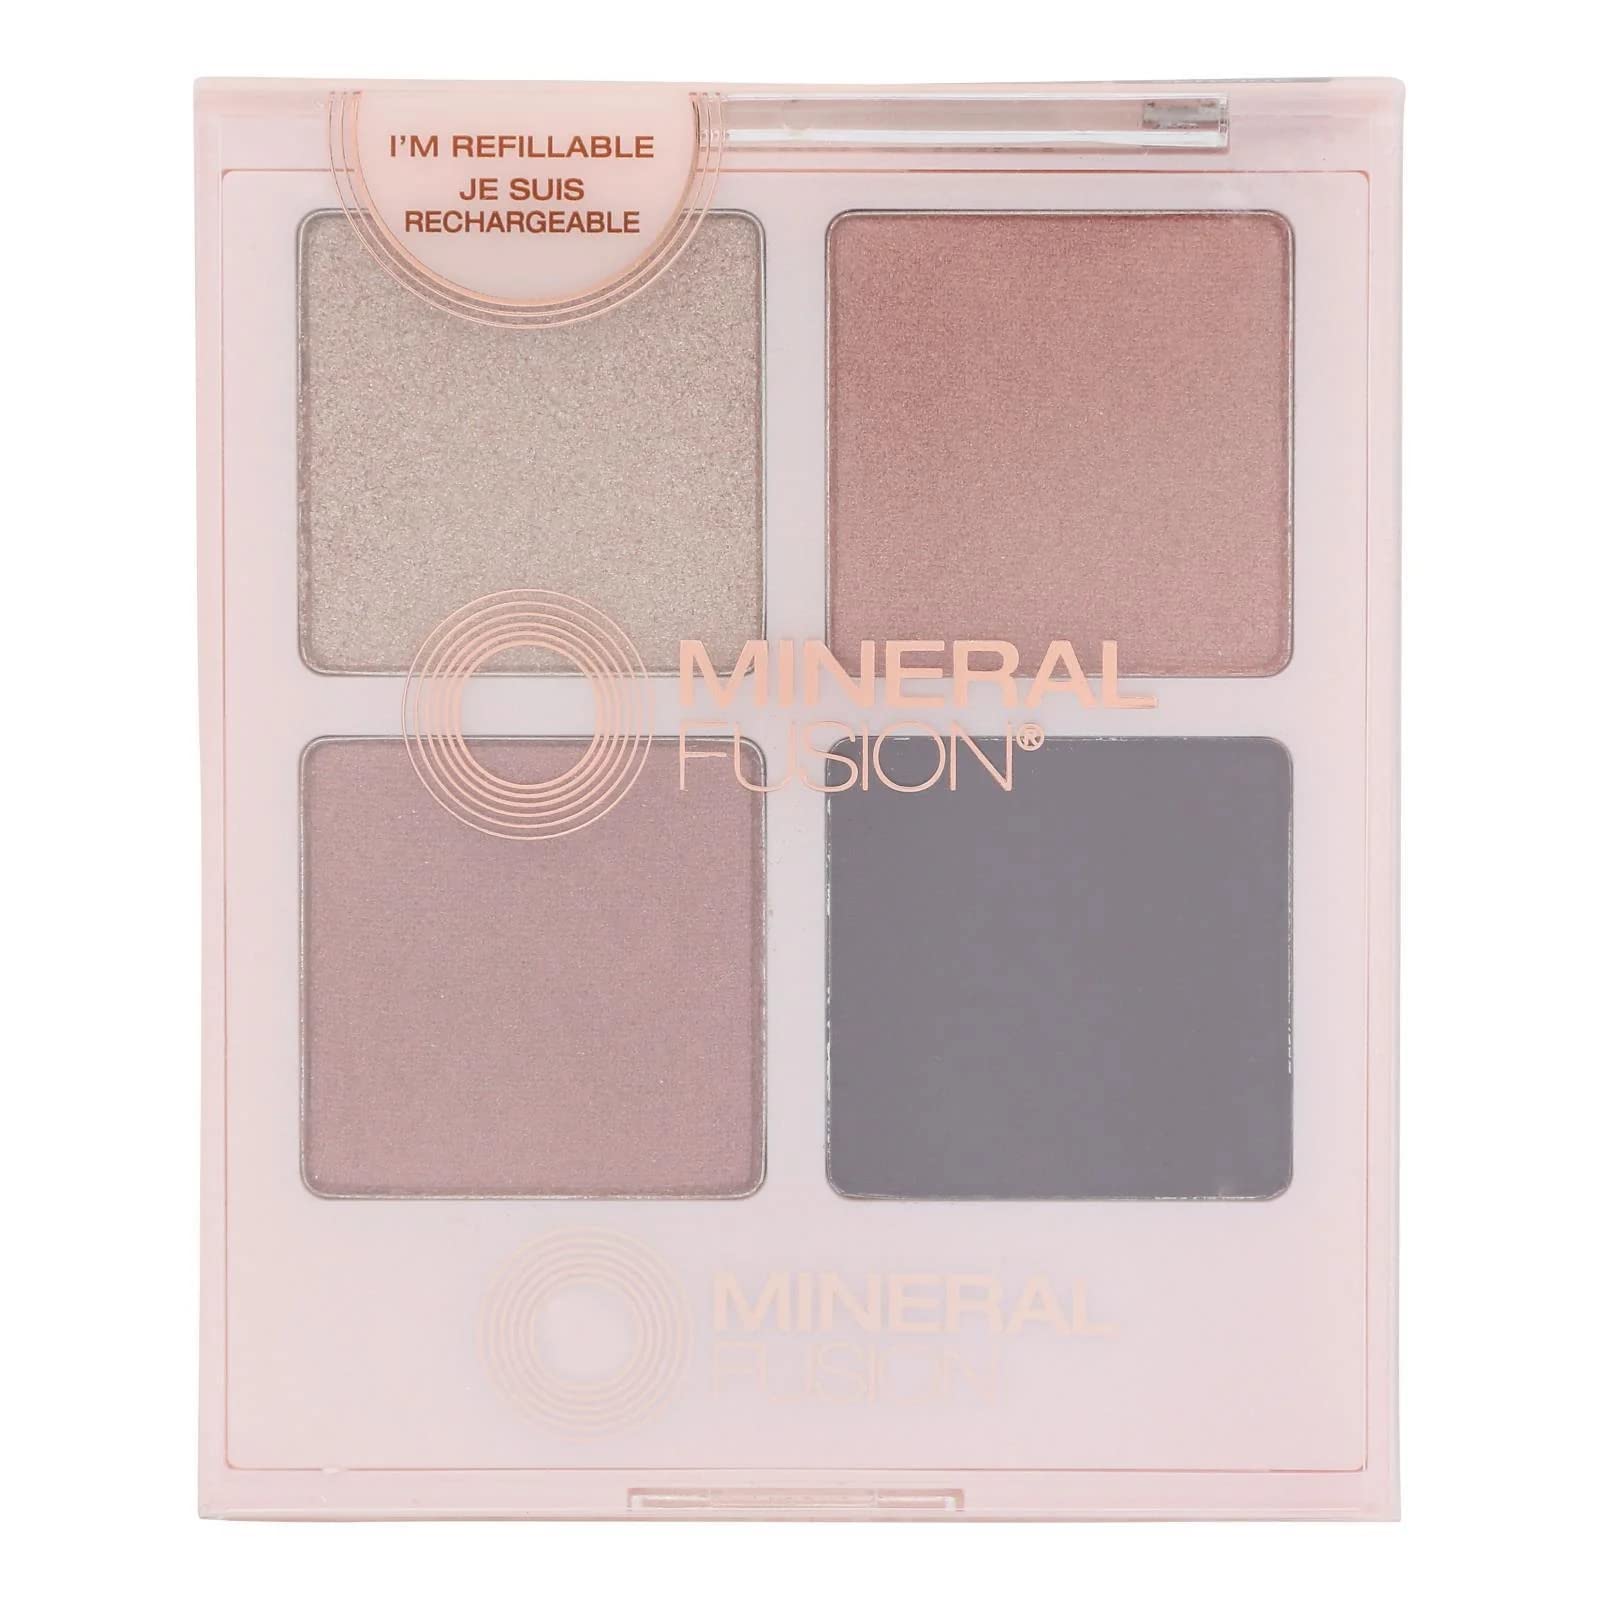 Mineral Fusion Girls Night Out Eyeshadow, 0.25 oz